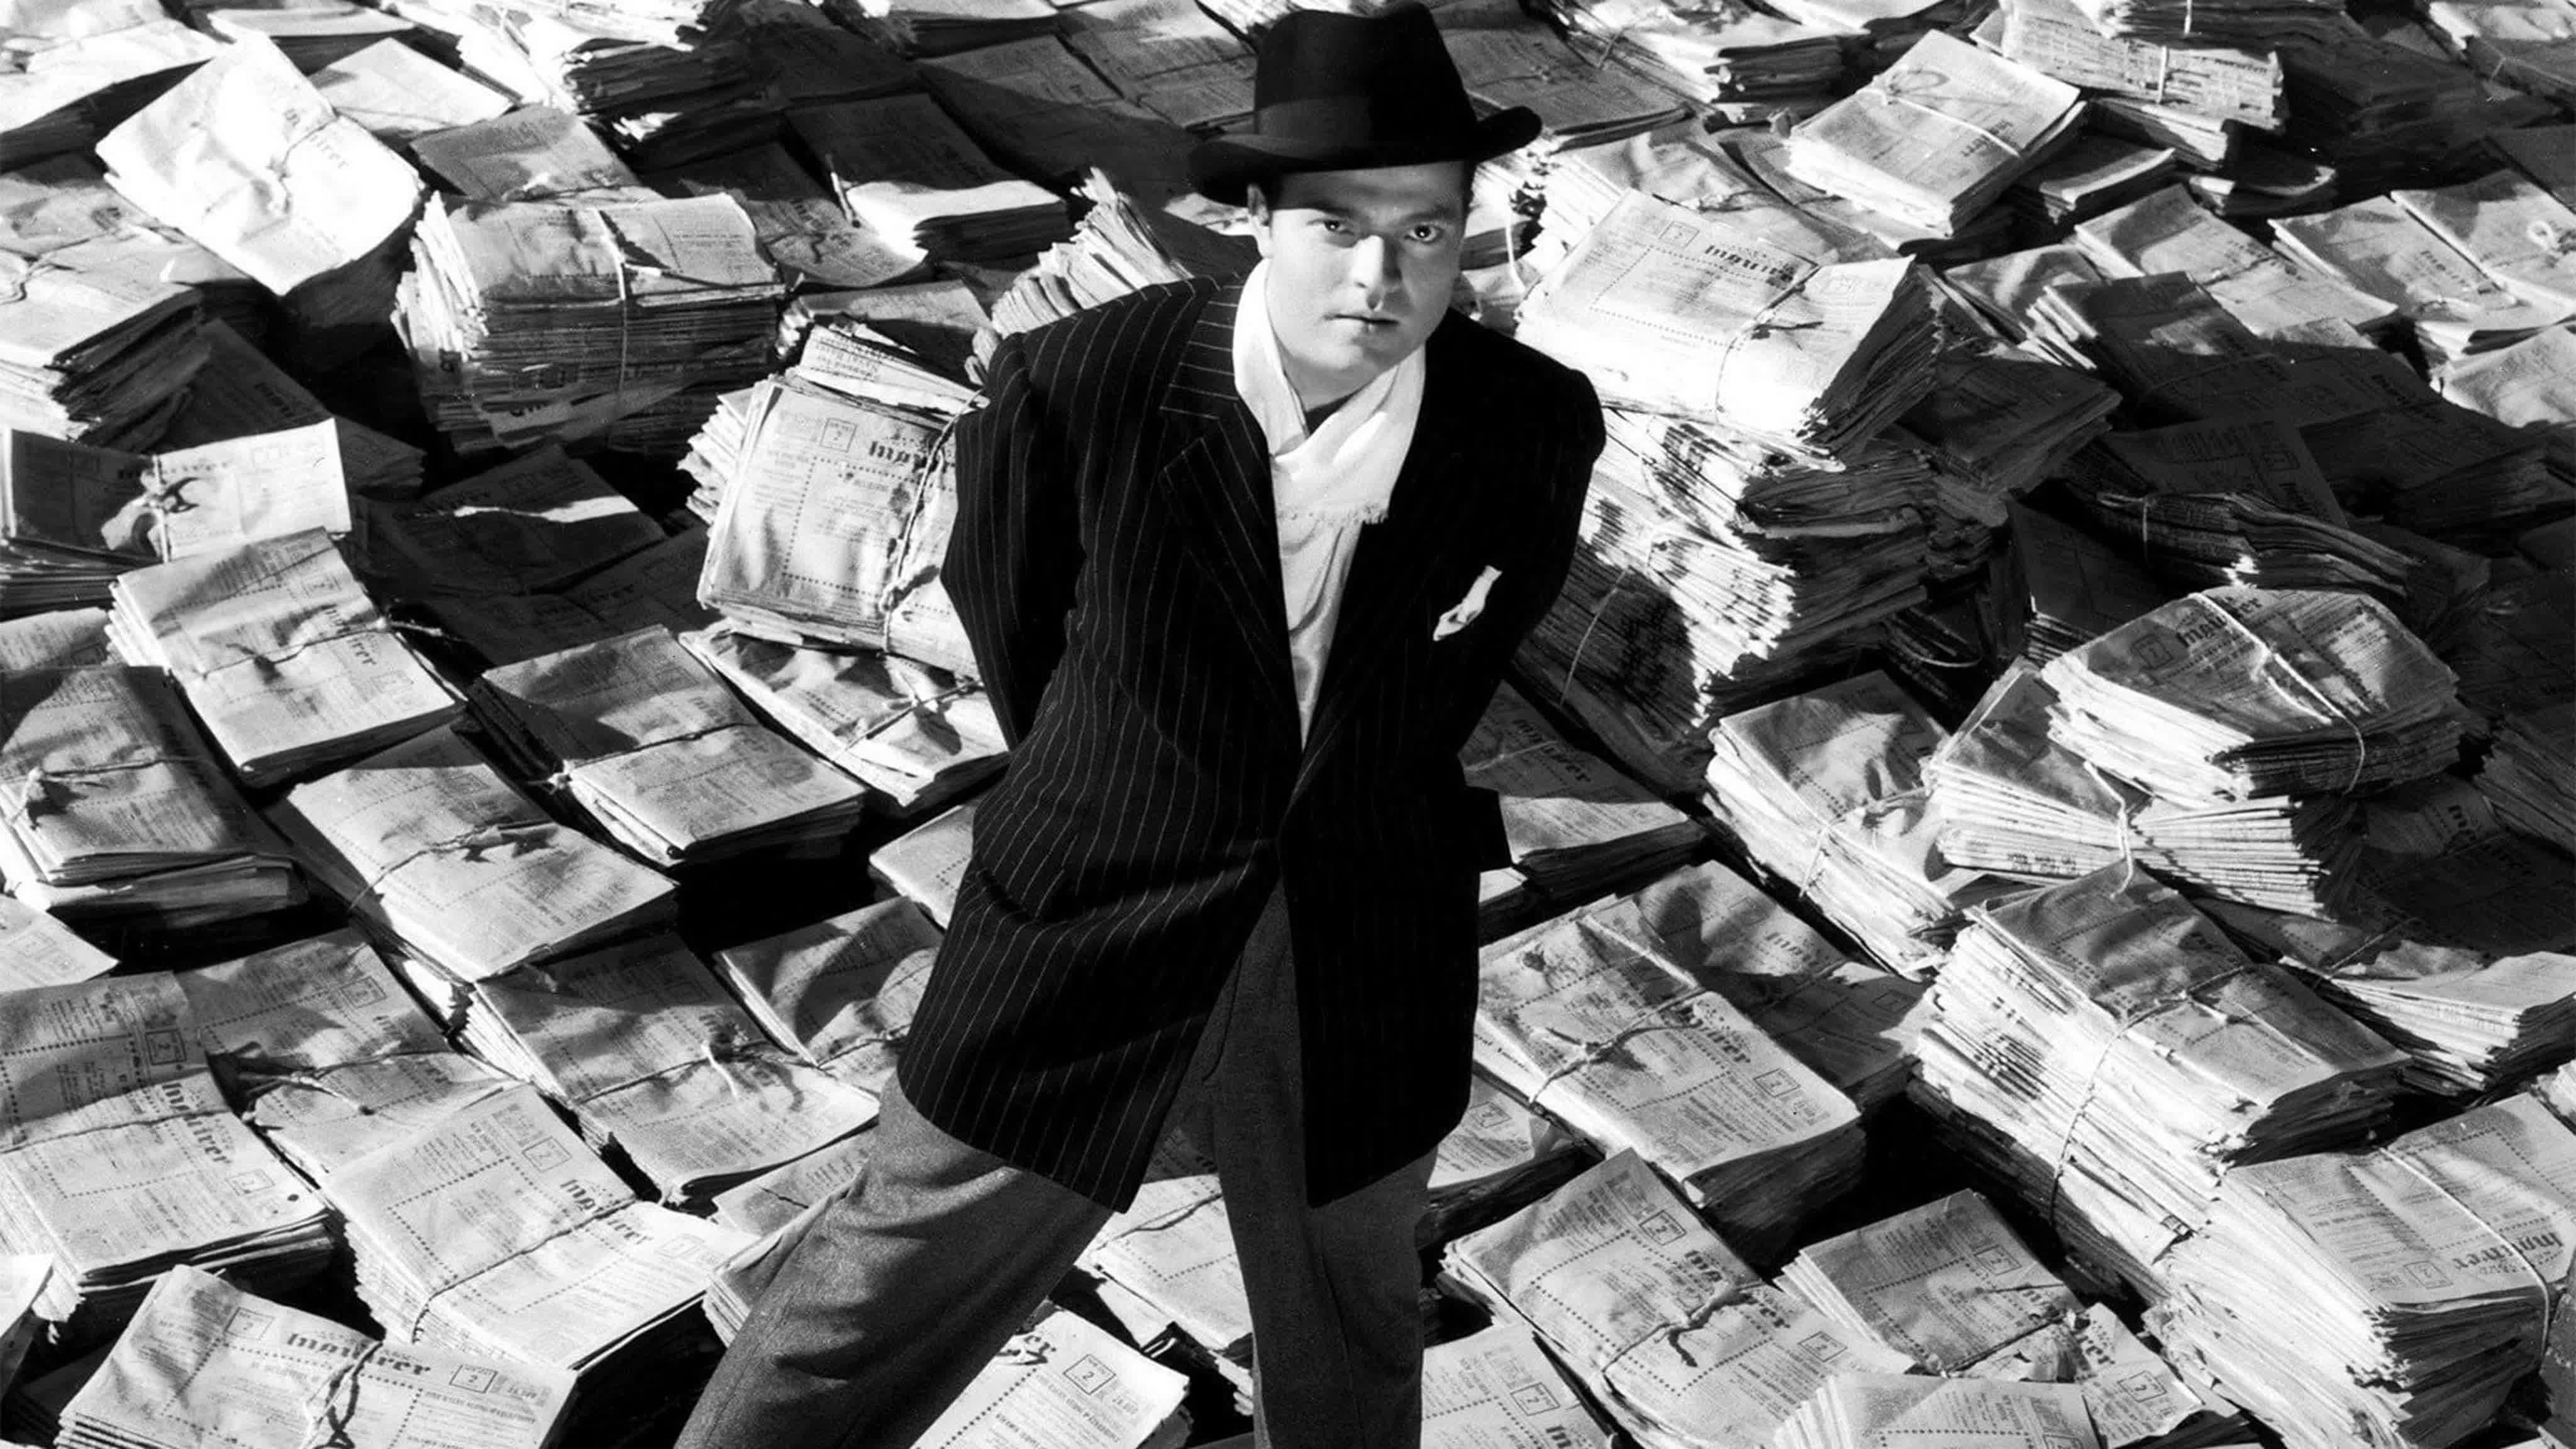 citizen kane: the power of words